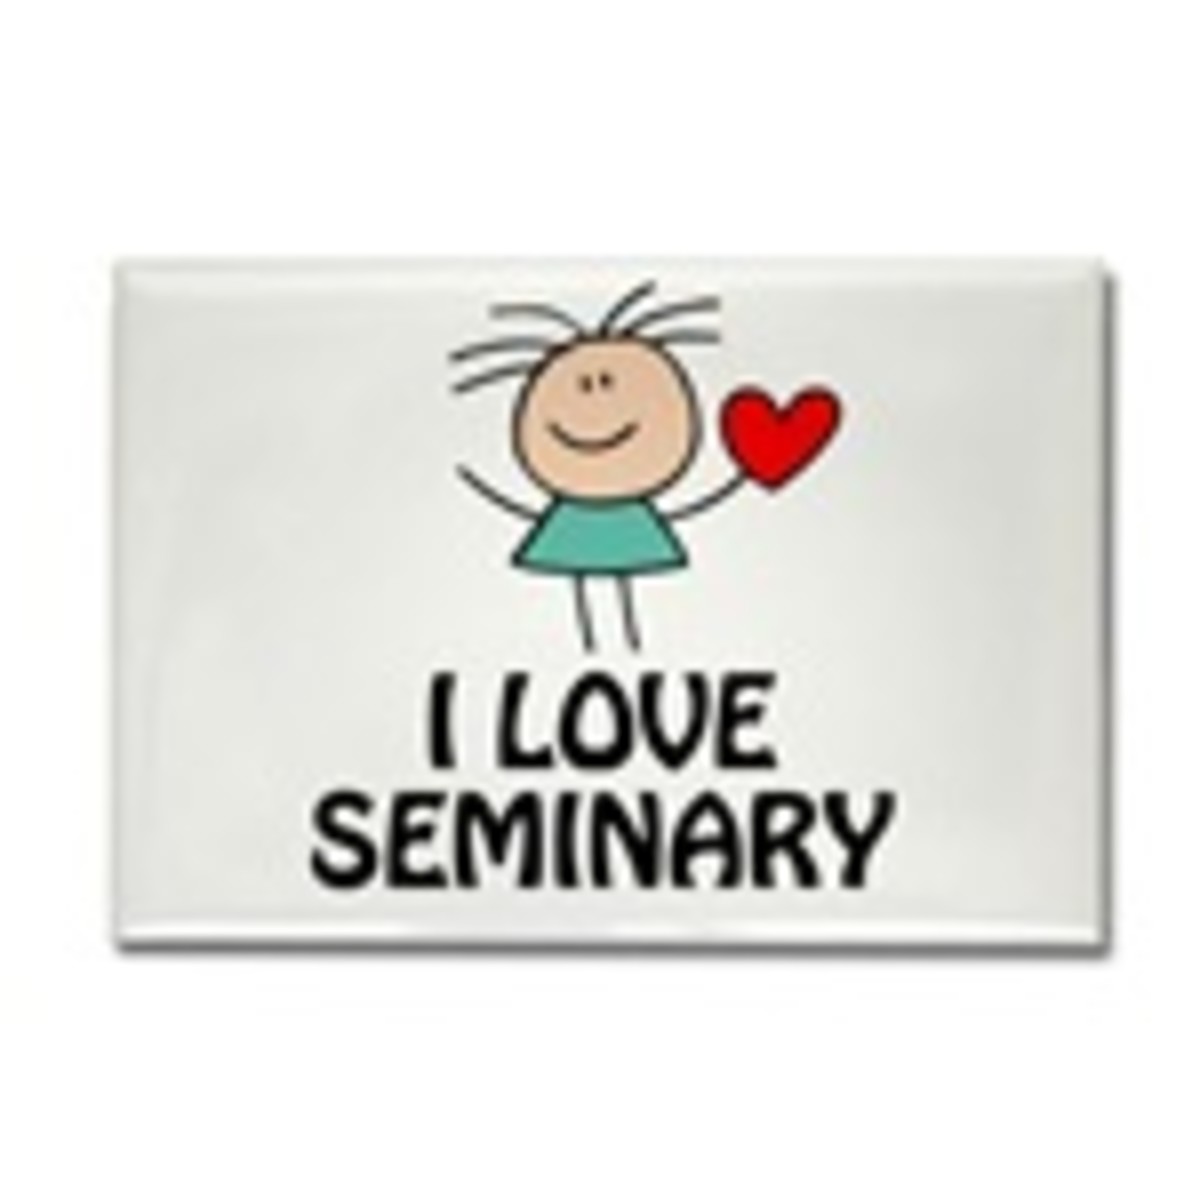 mormon-teens-get-an-early-start-to-the-day--early-morning-seminary-religion-class